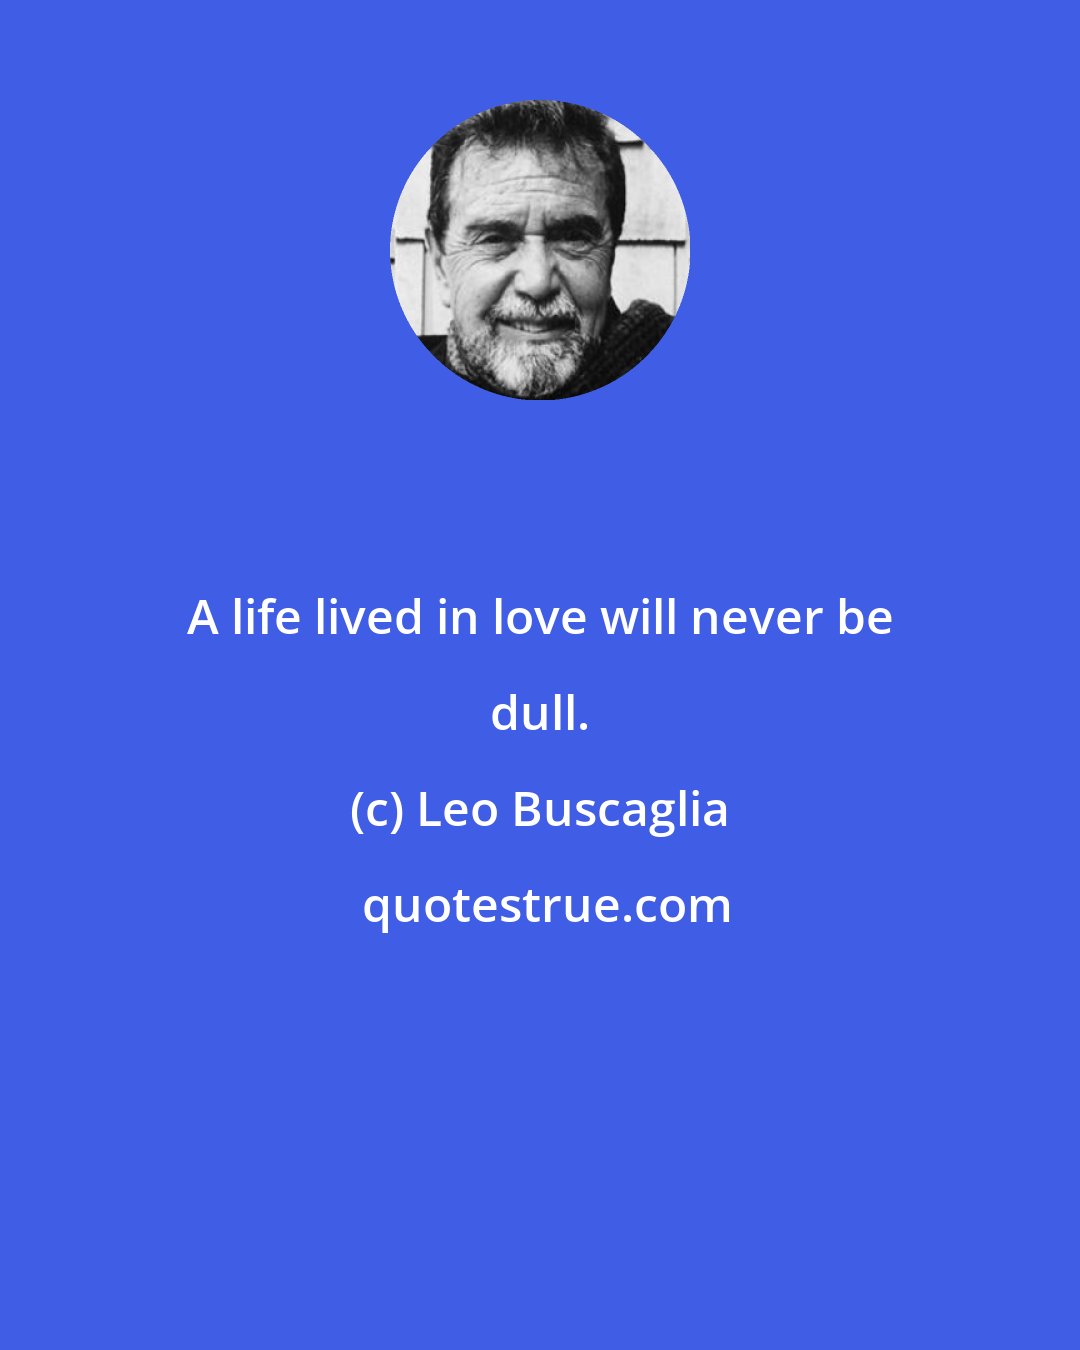 Leo Buscaglia: A life lived in love will never be dull.